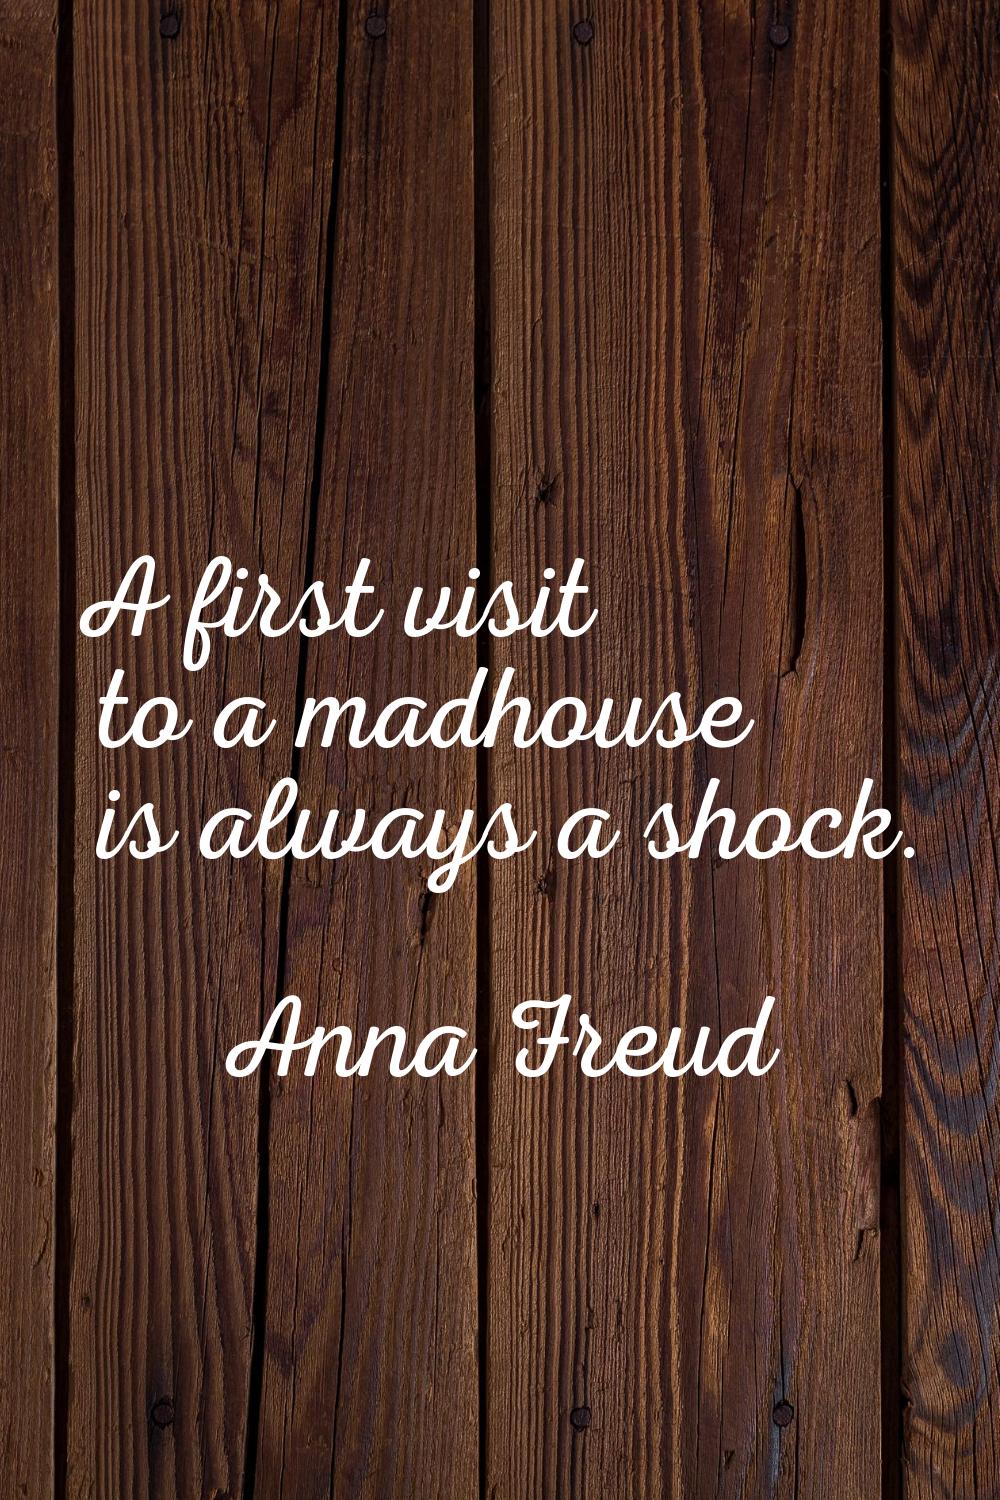 A first visit to a madhouse is always a shock.